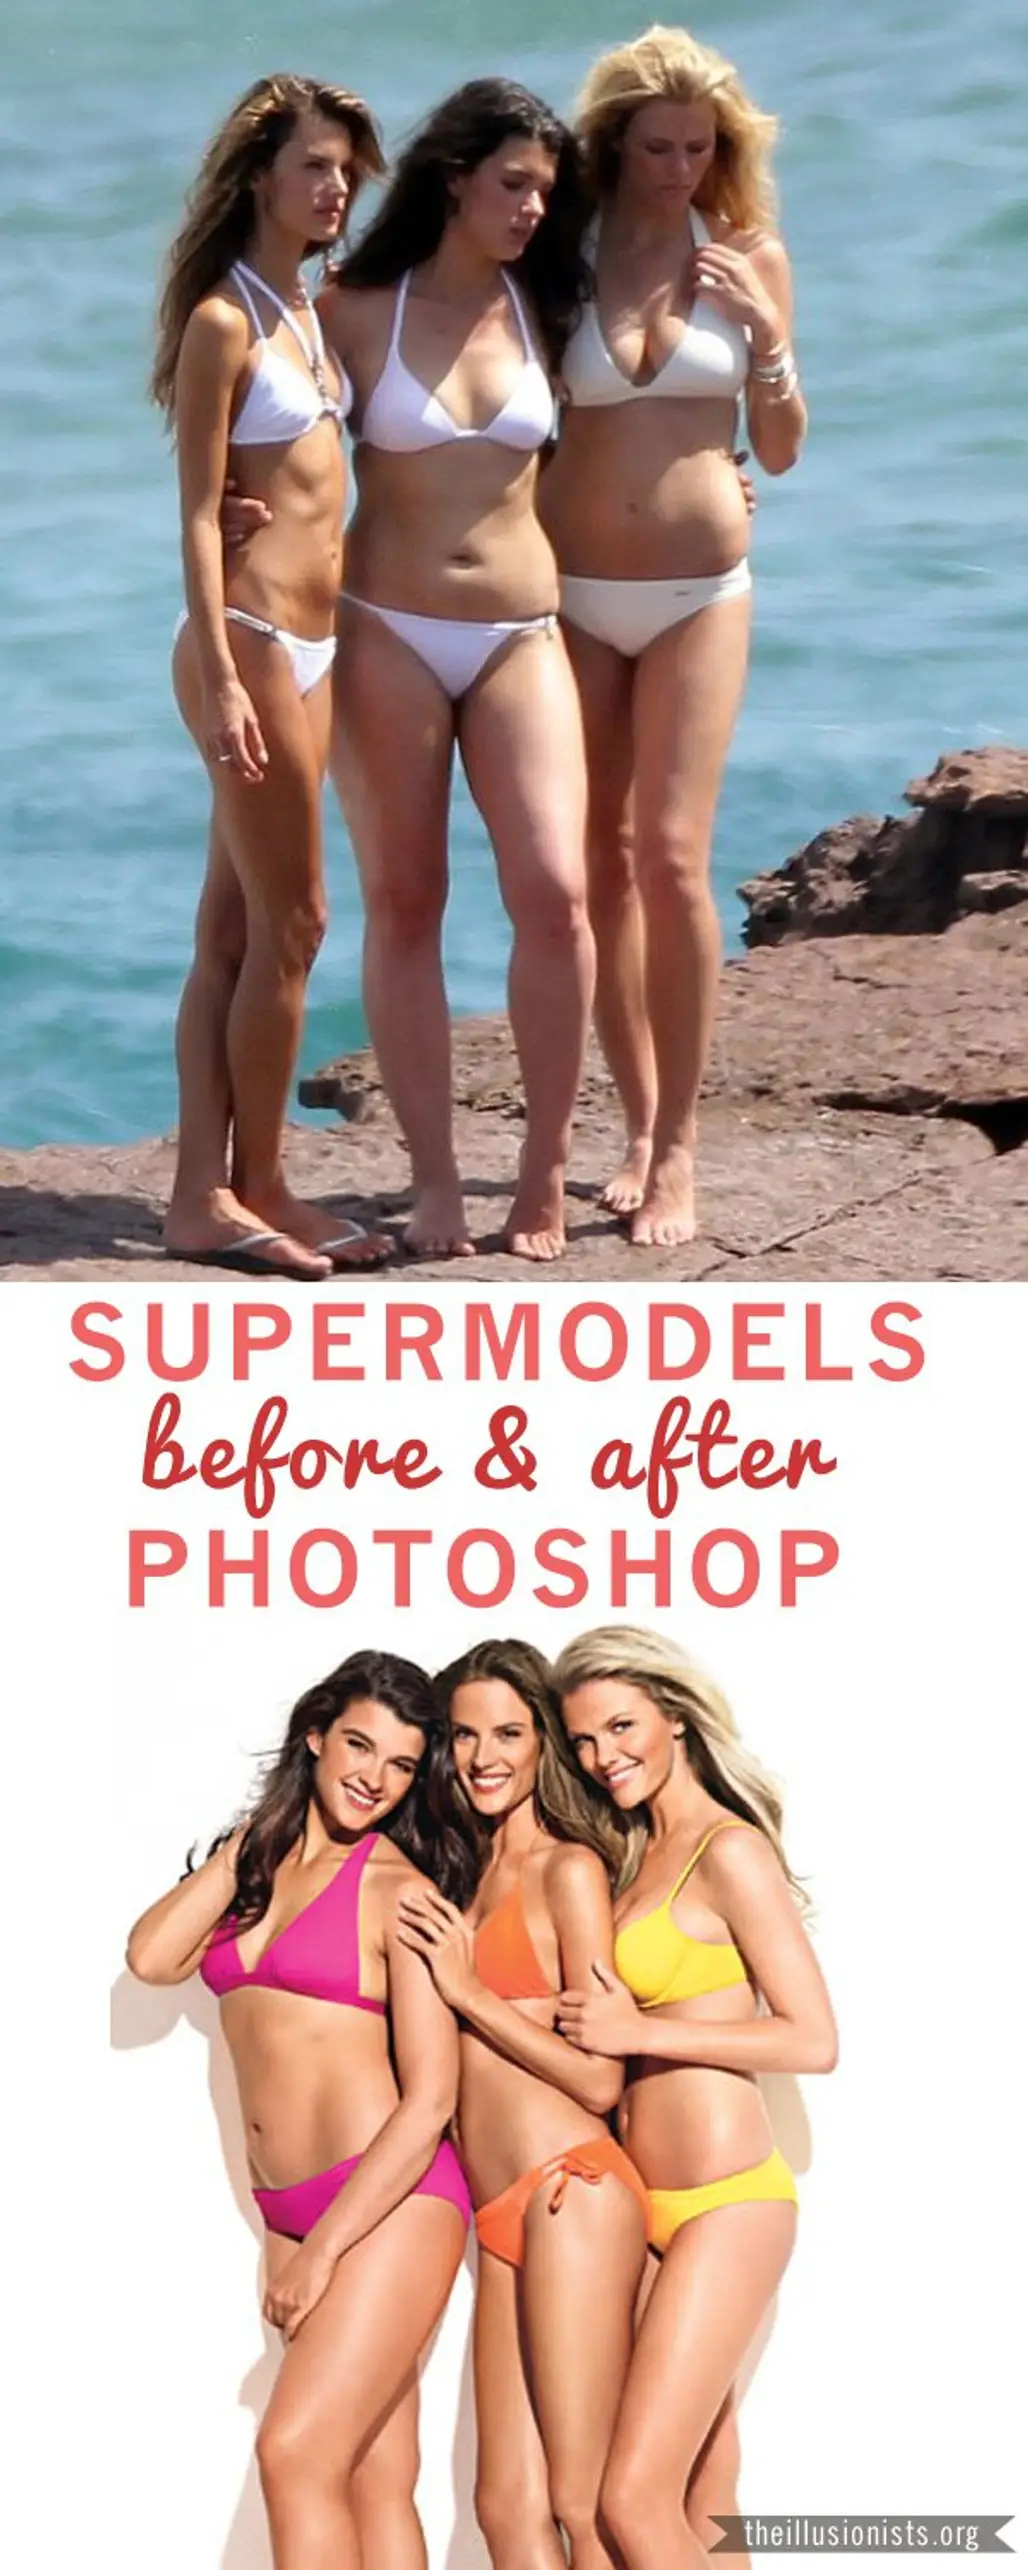 Supermodels before and after